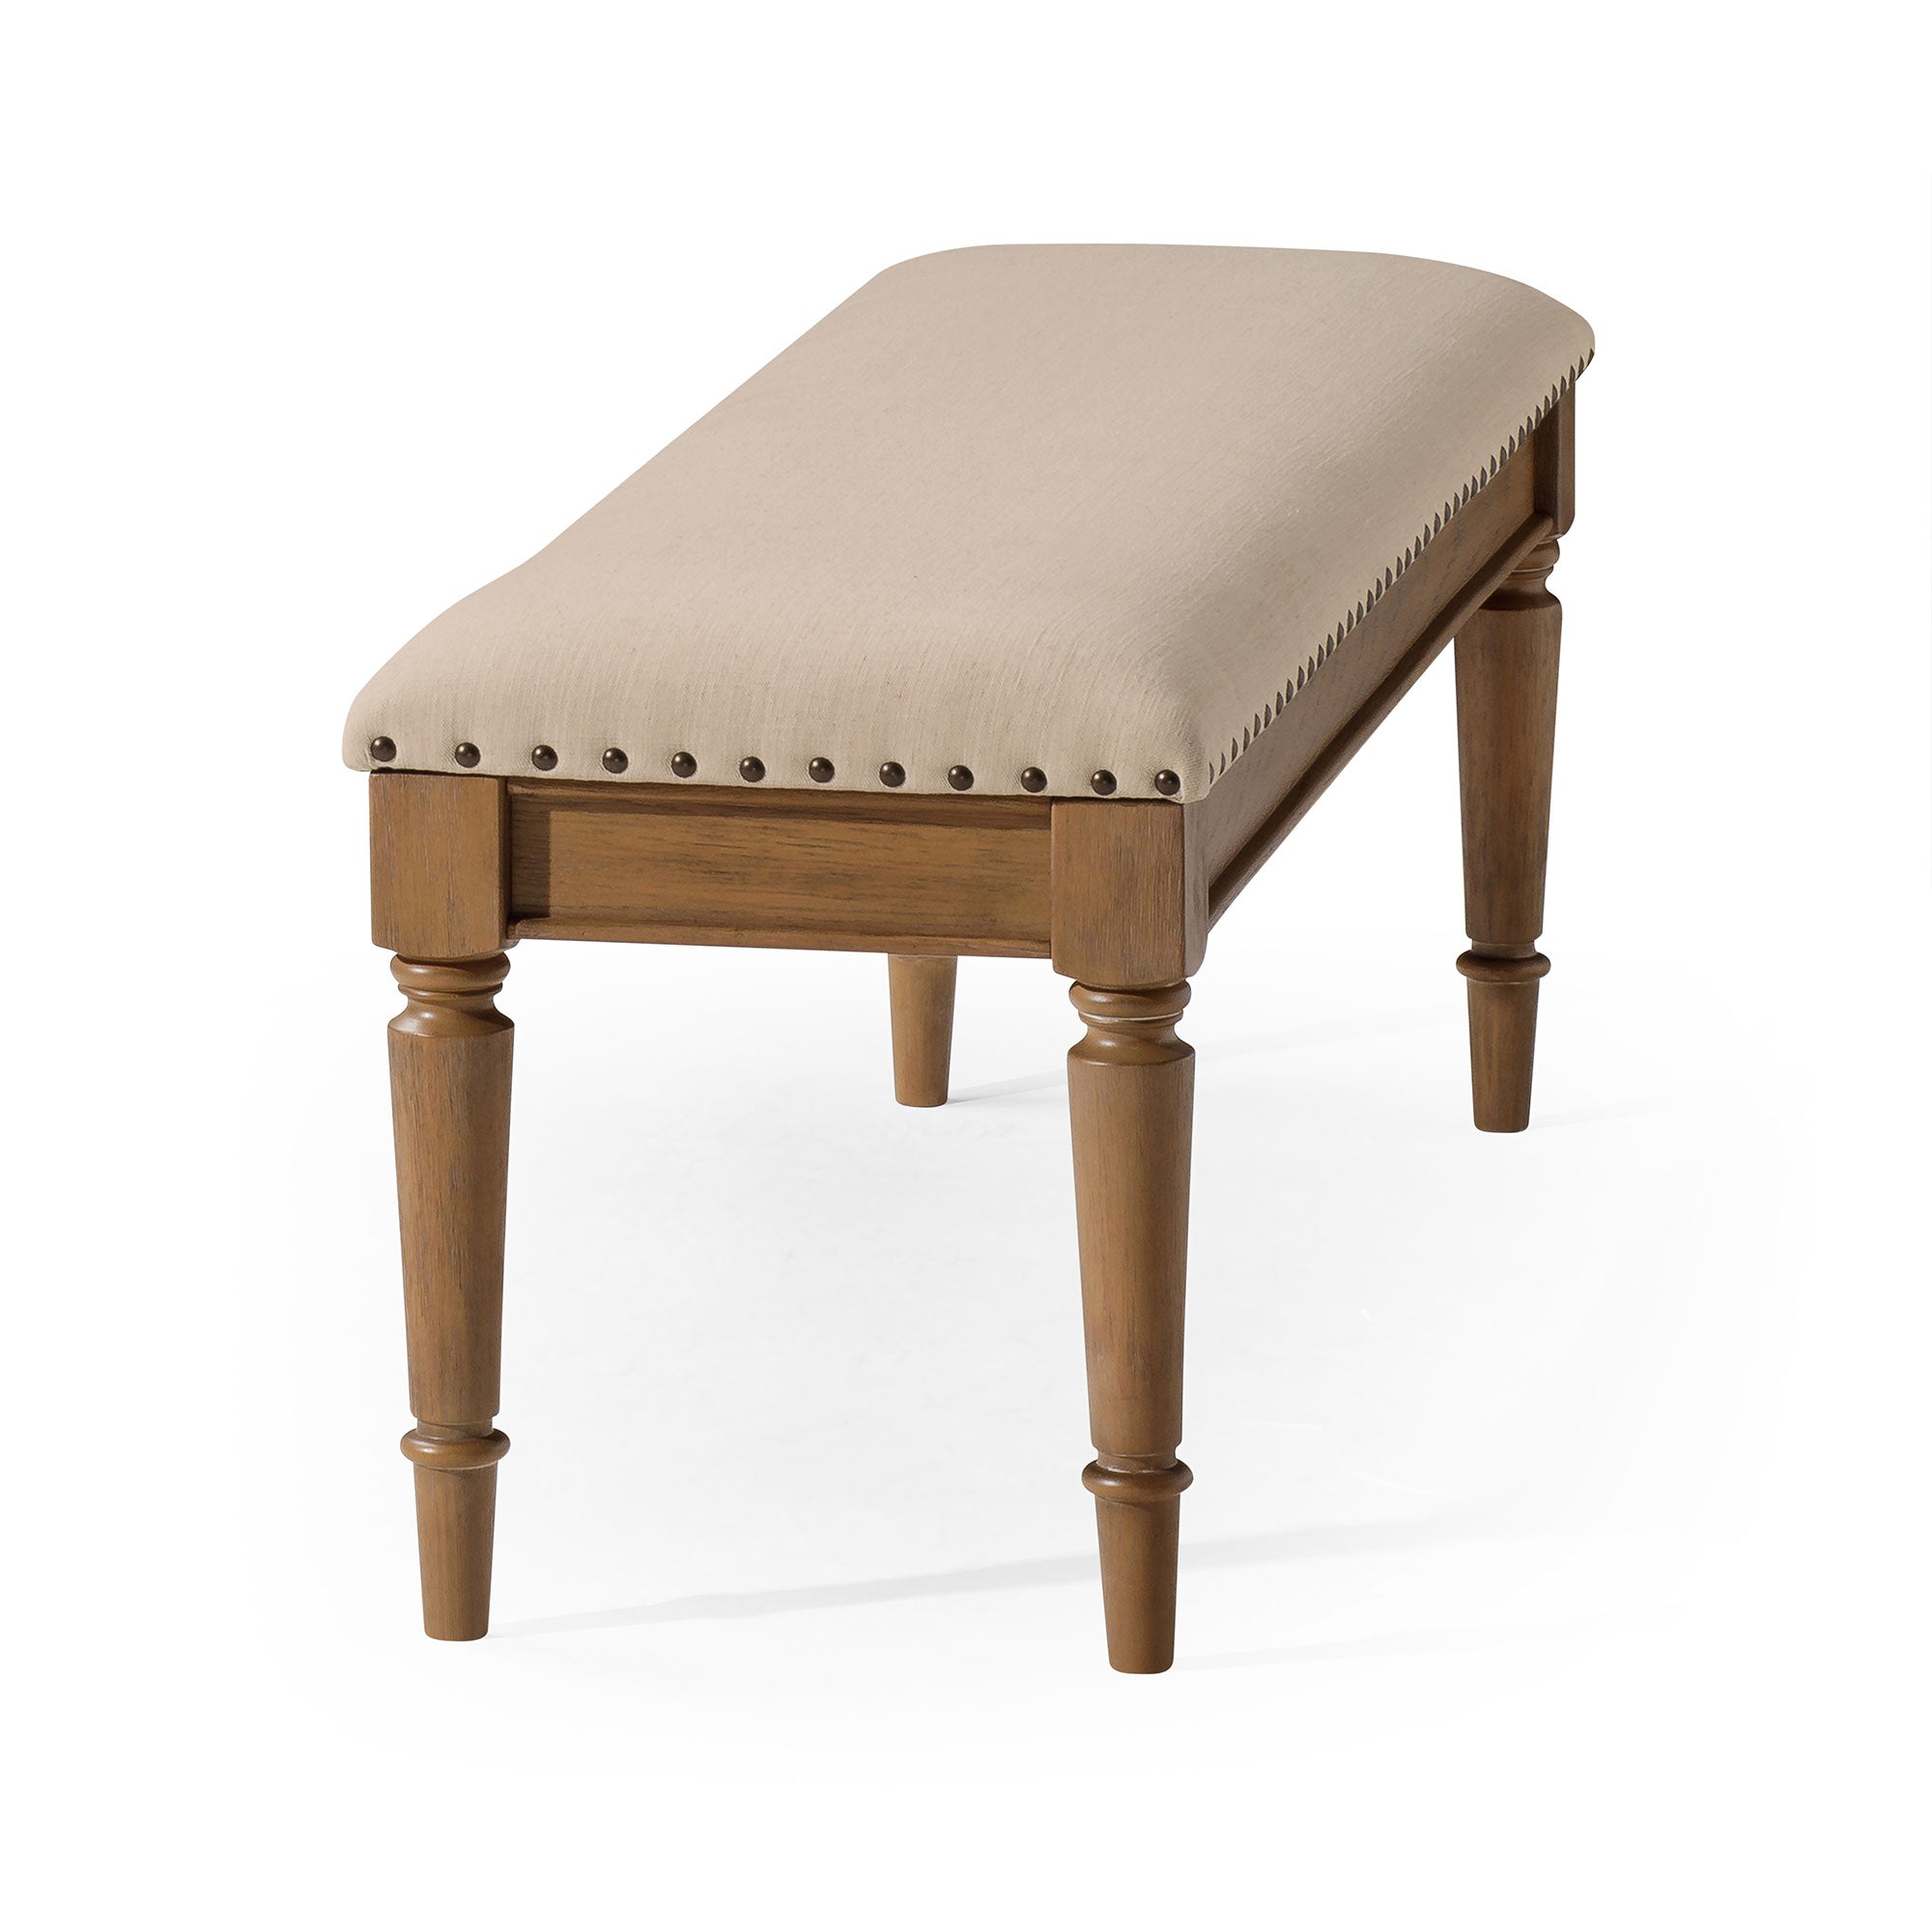 Elizabeth Classical Upholstered Wooden Bench in Antiqued Natural Finish in Ottomans & Benches by Maven Lane